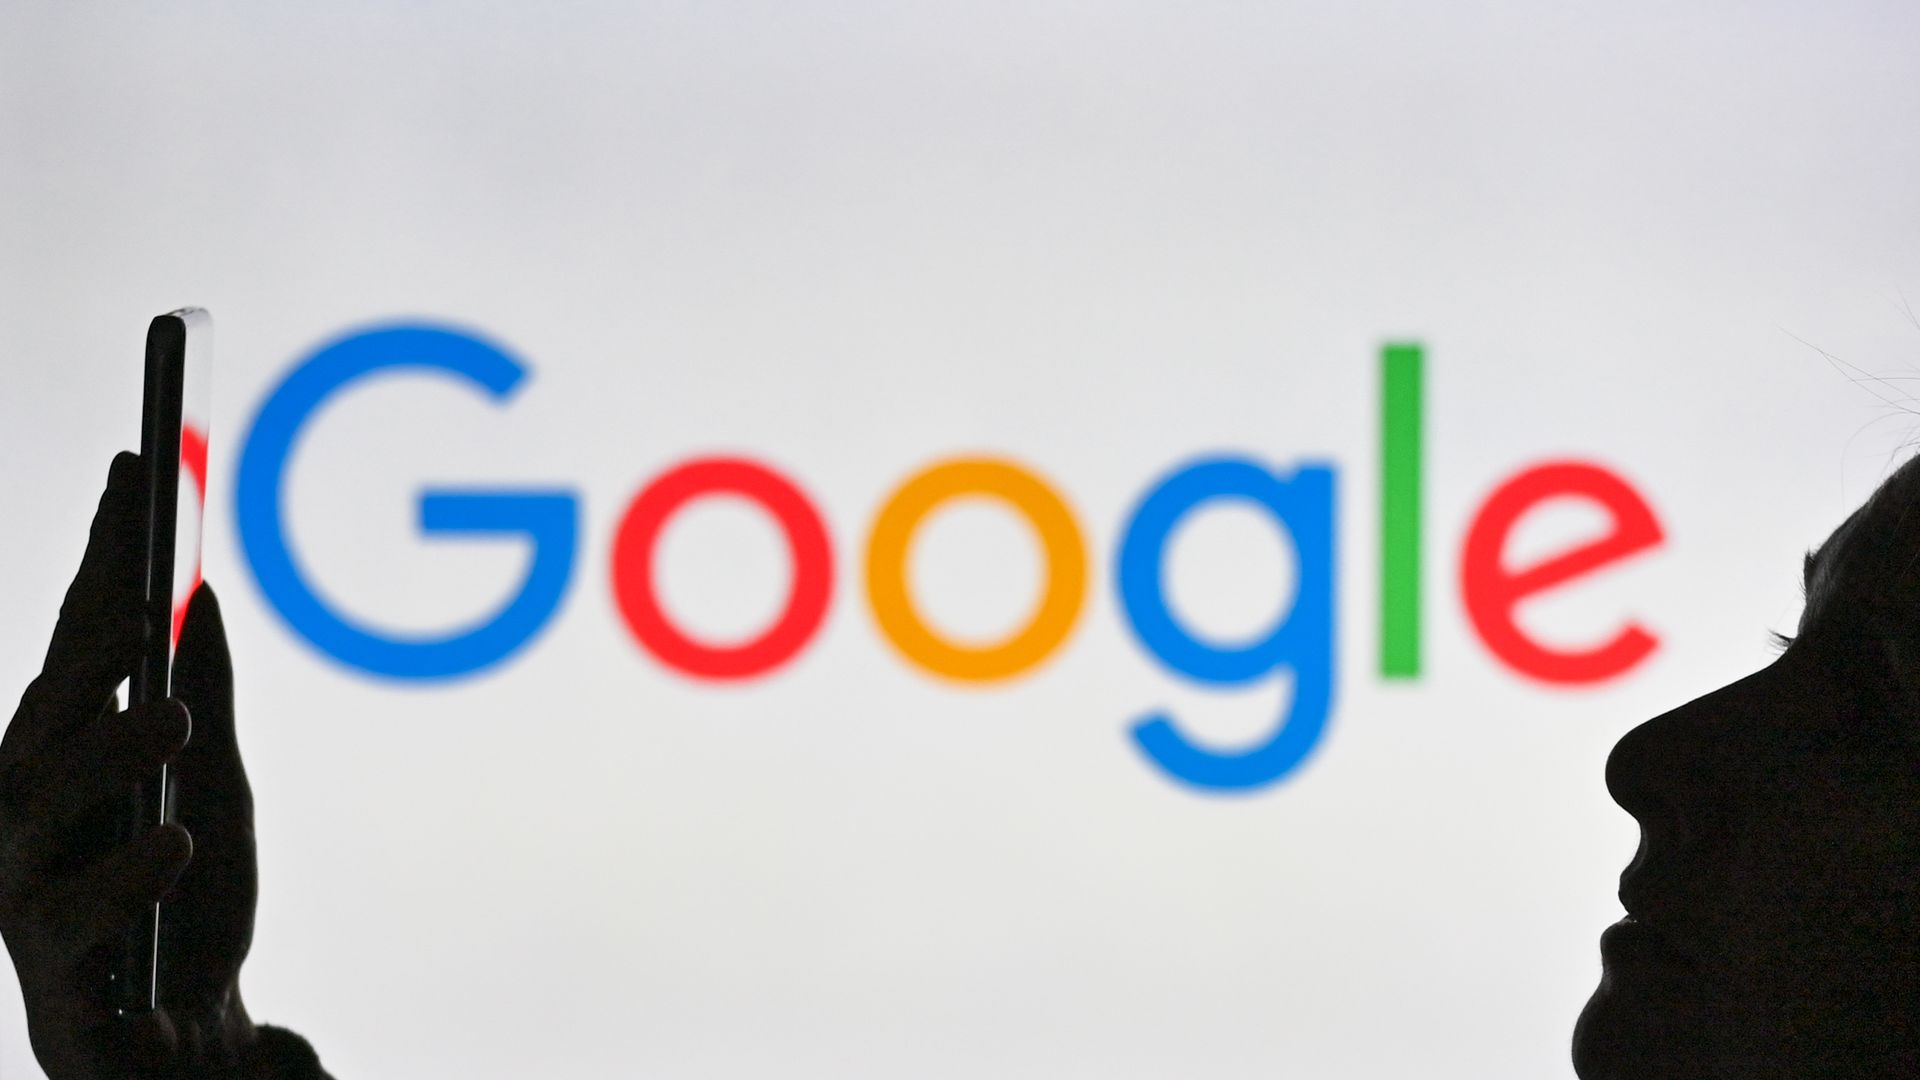 Picture of Google logo with a person standing in front of it holding a phone